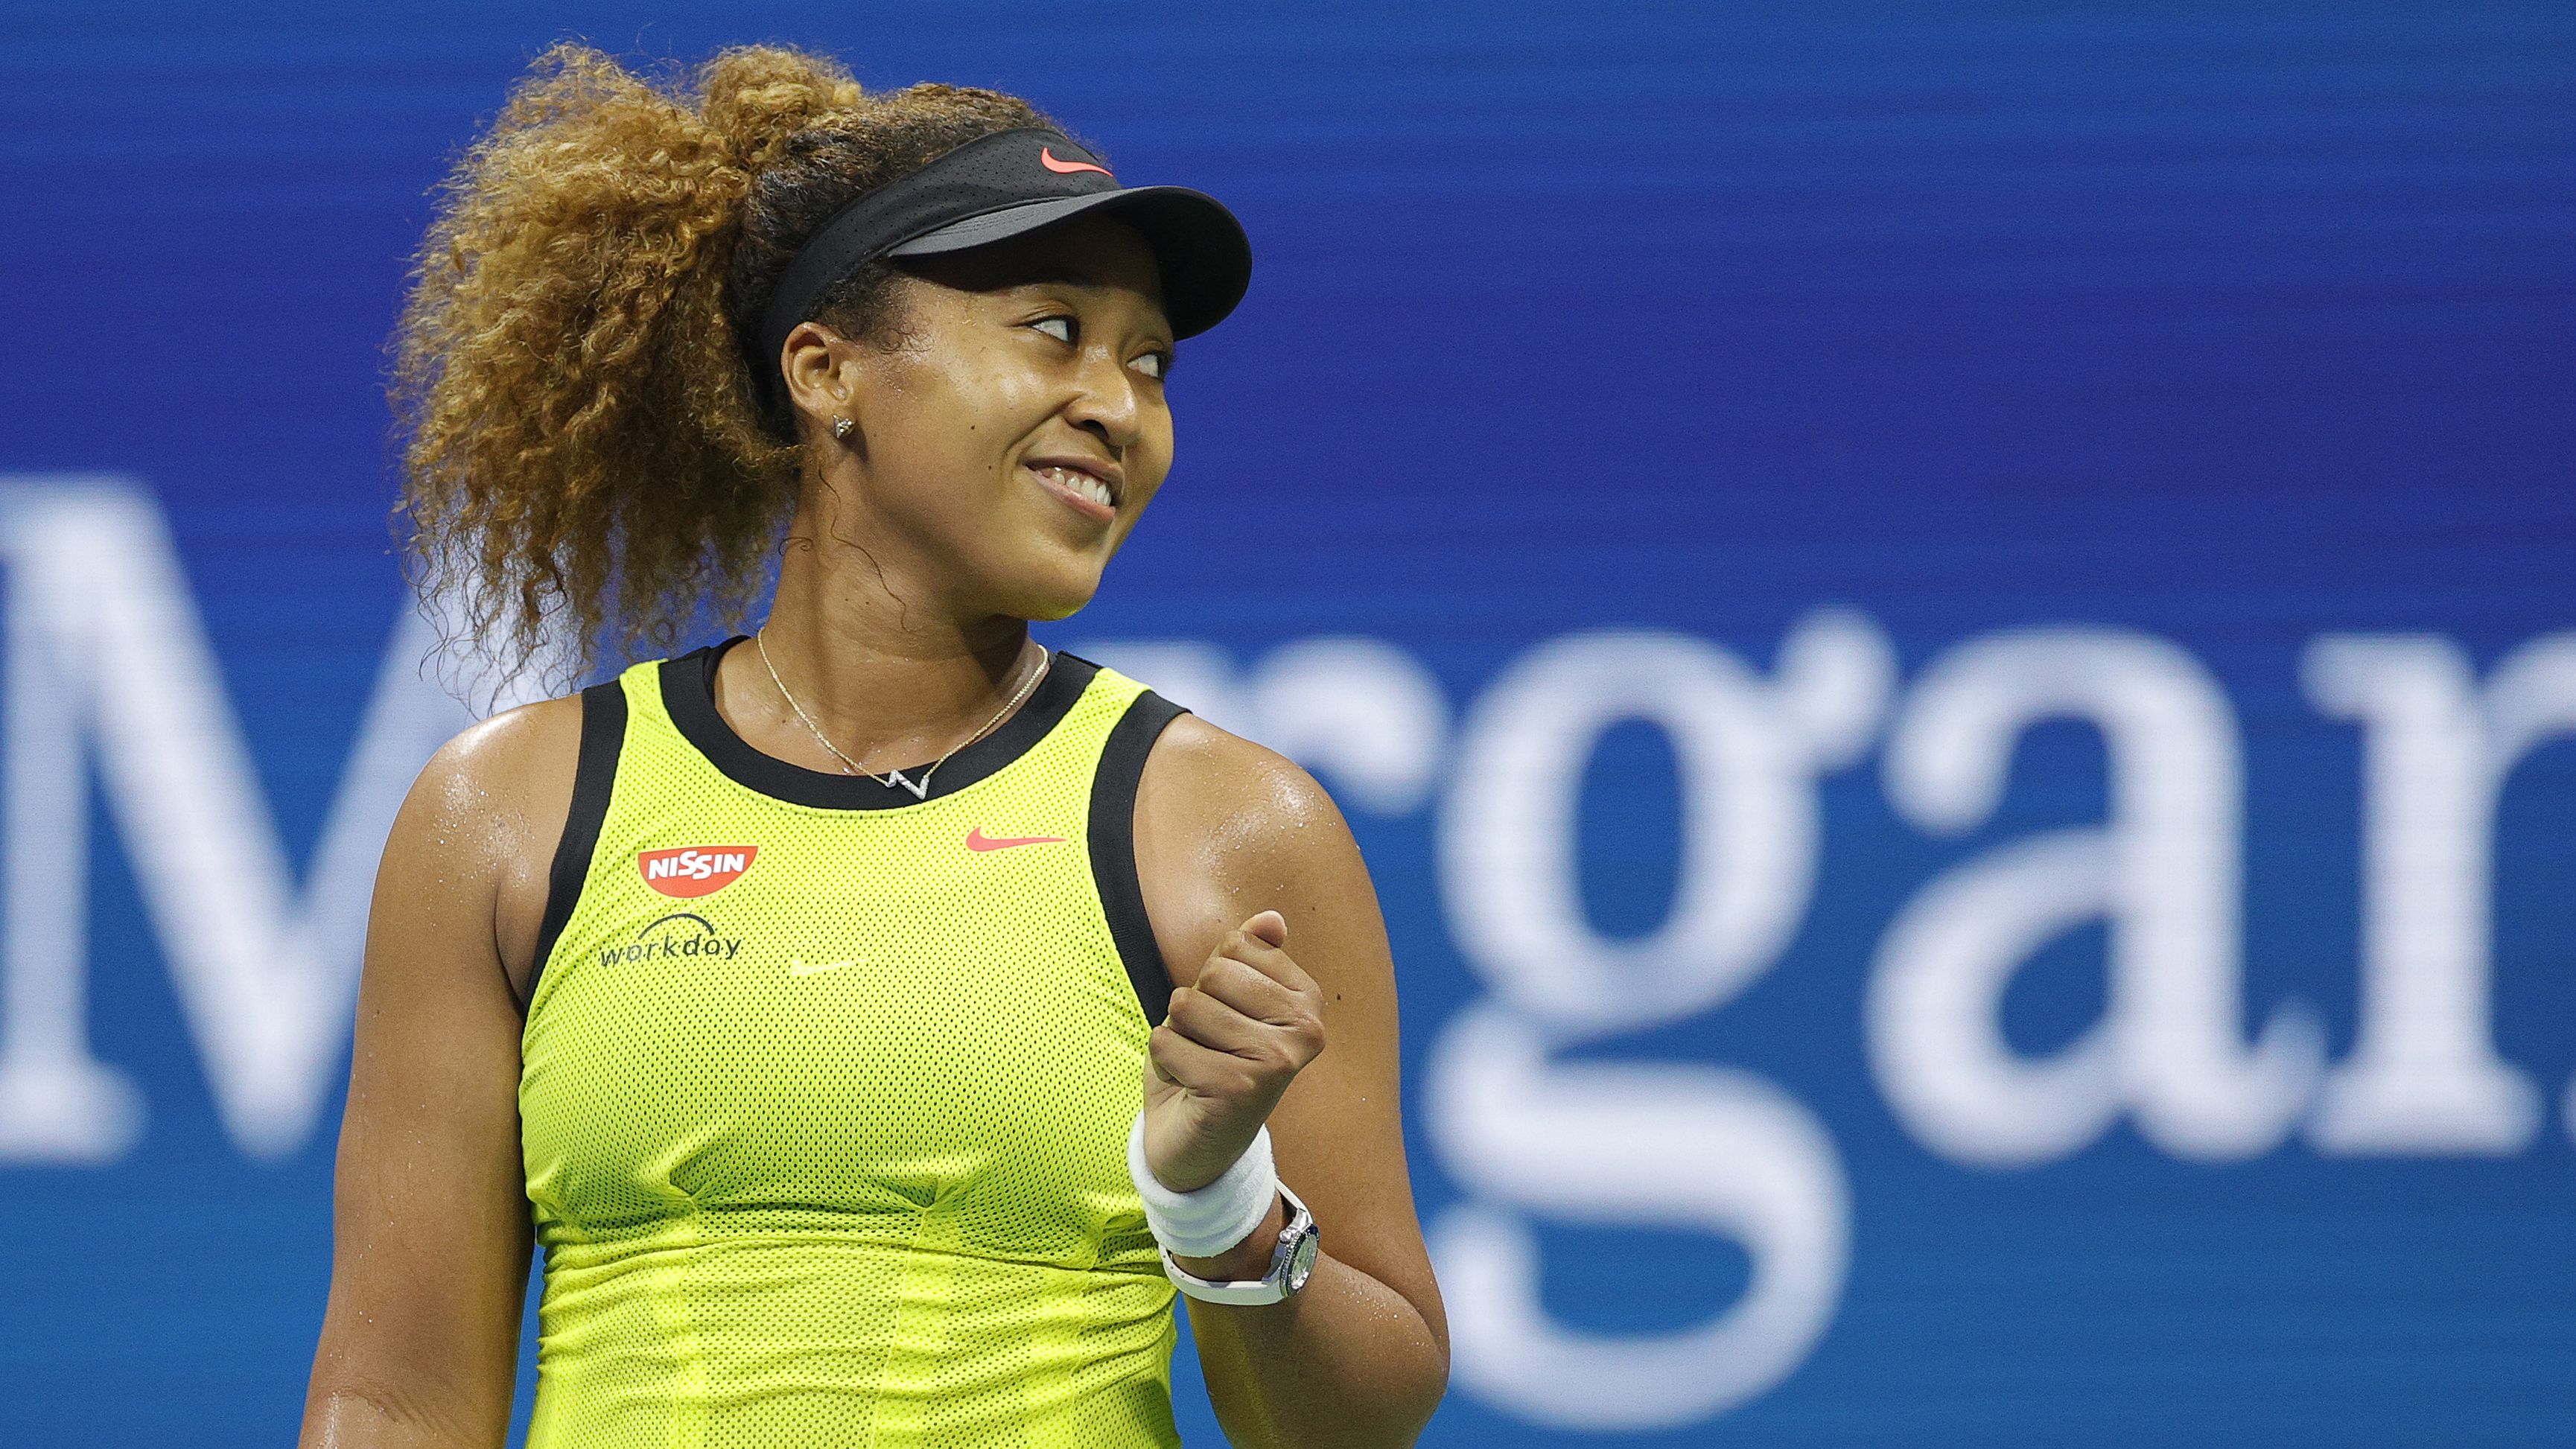 Naomi Osaka, also named in Time's list, sparked discussion around mental health this year.